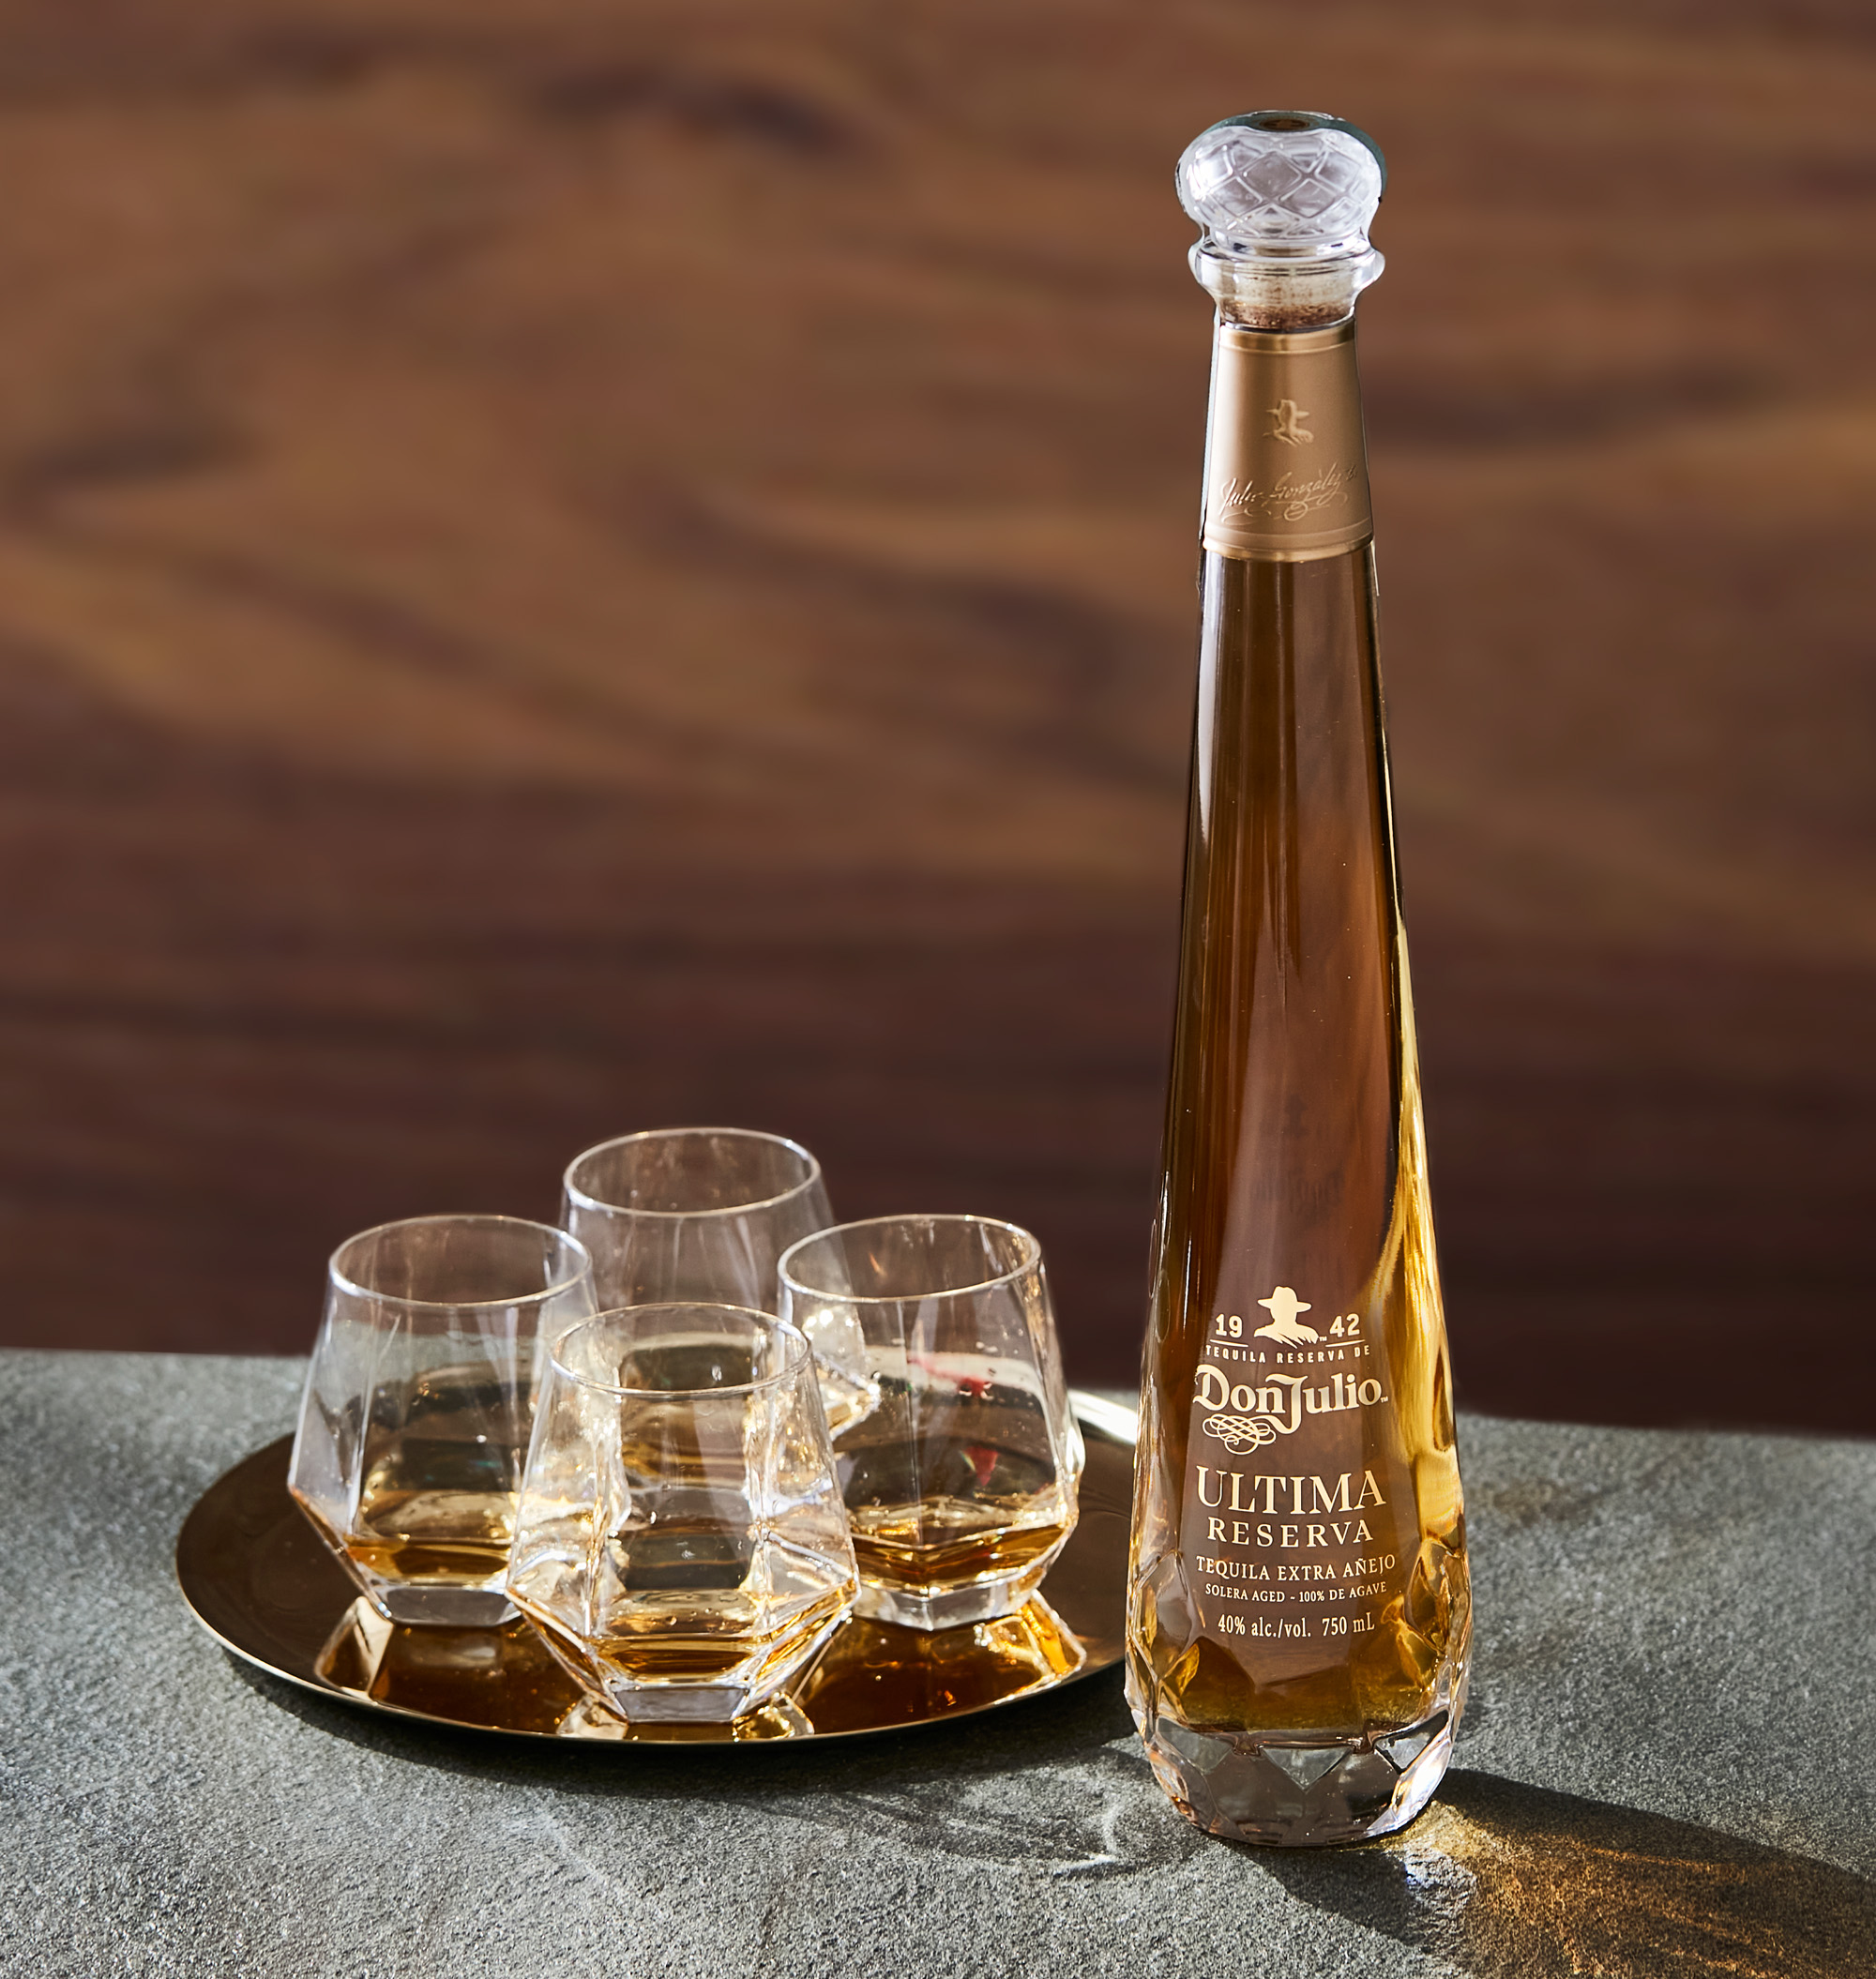 Tequila Don Julio Ultima Reserva is a special 36-month aged luxury Extra-Anejo that preserves Don Julio Gonzlez's ultimate legacy ? the final agave harvest planted by Gonzlez and his family in 2006.